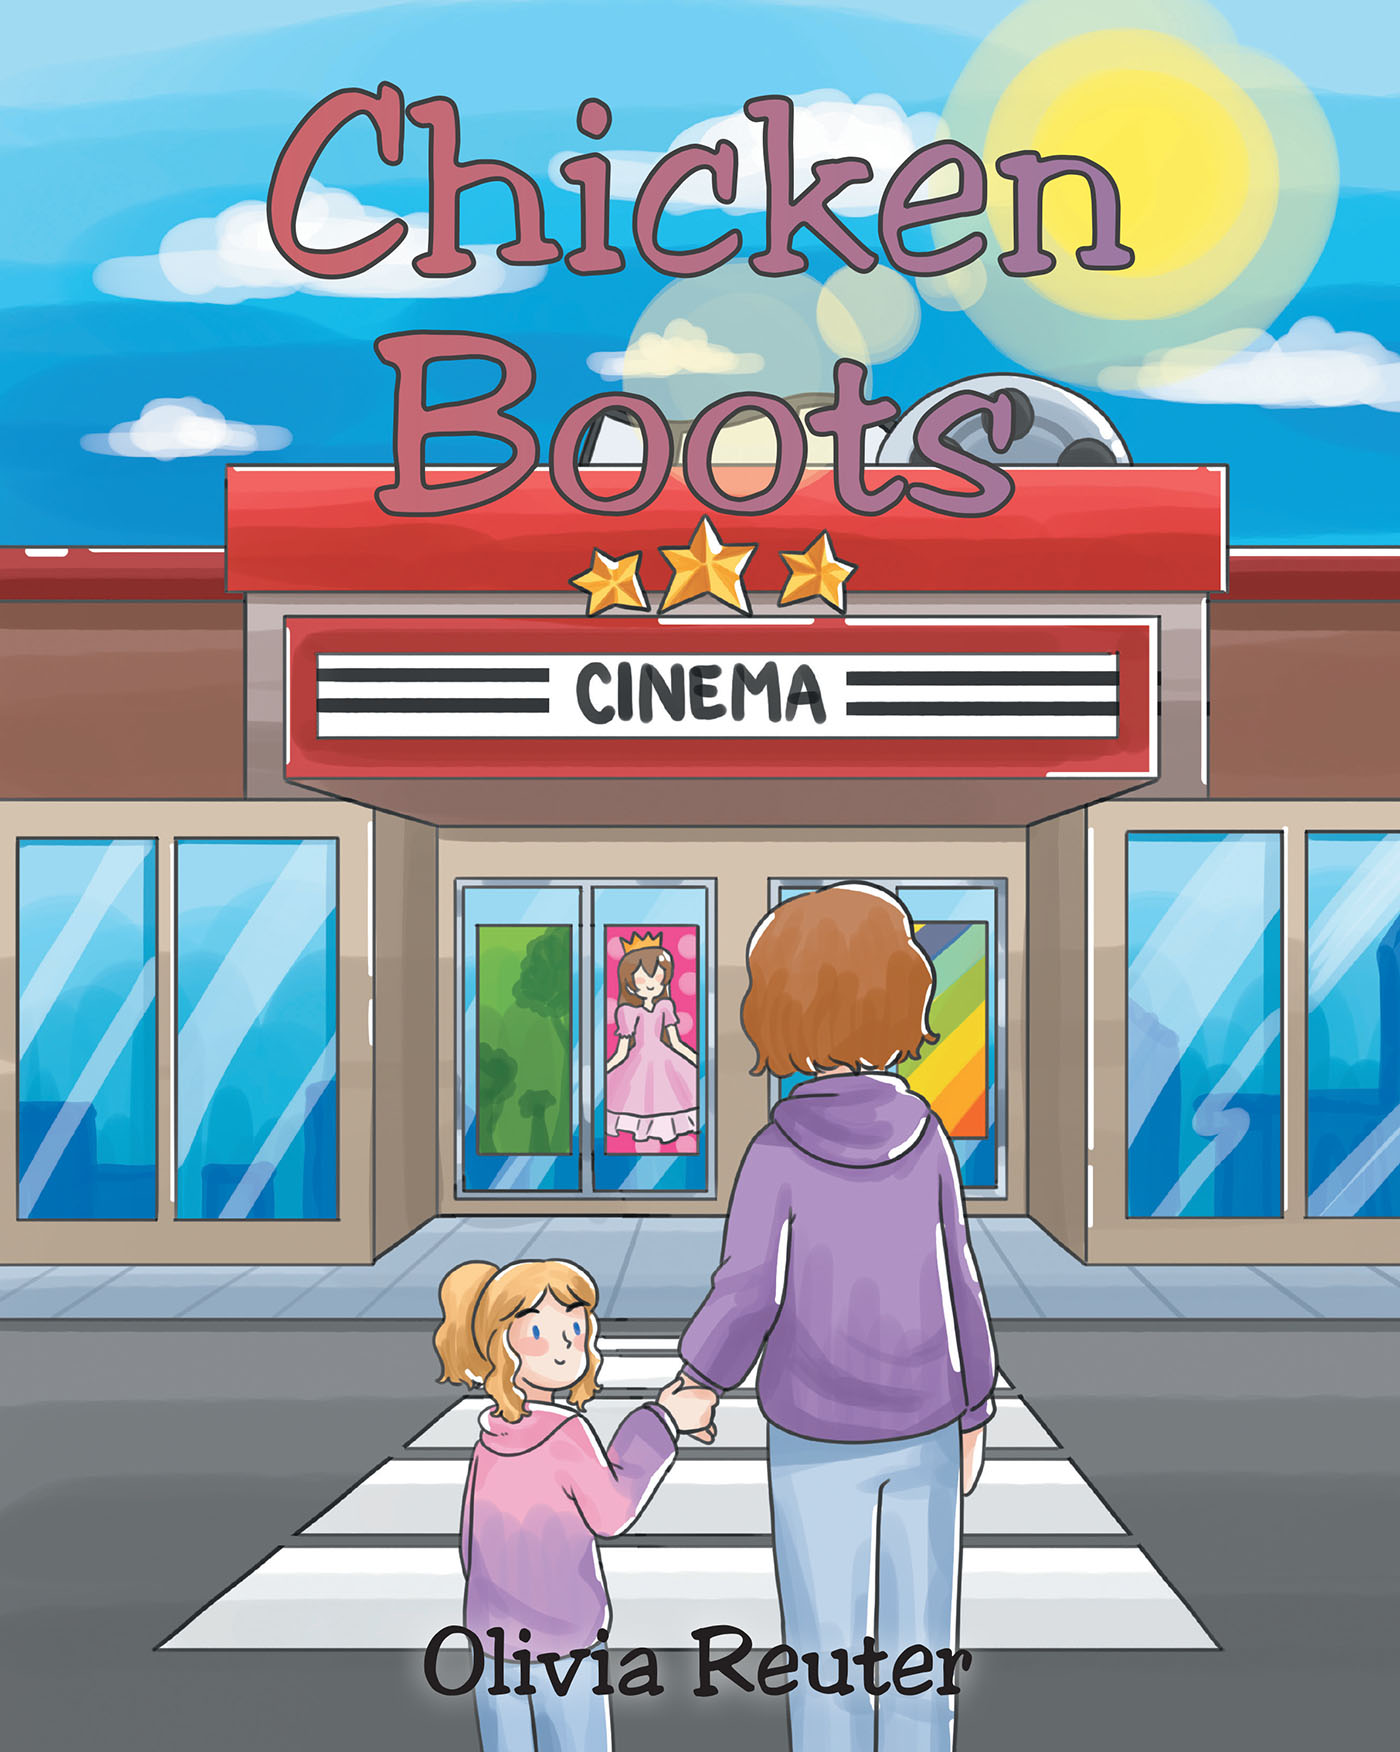 Author Olivia Reuter’s New Book, "Chicken Boots," is a Delightful Children’s Story That Follows a Four-Year-Old Girl’s First Trip to the Movie Theater